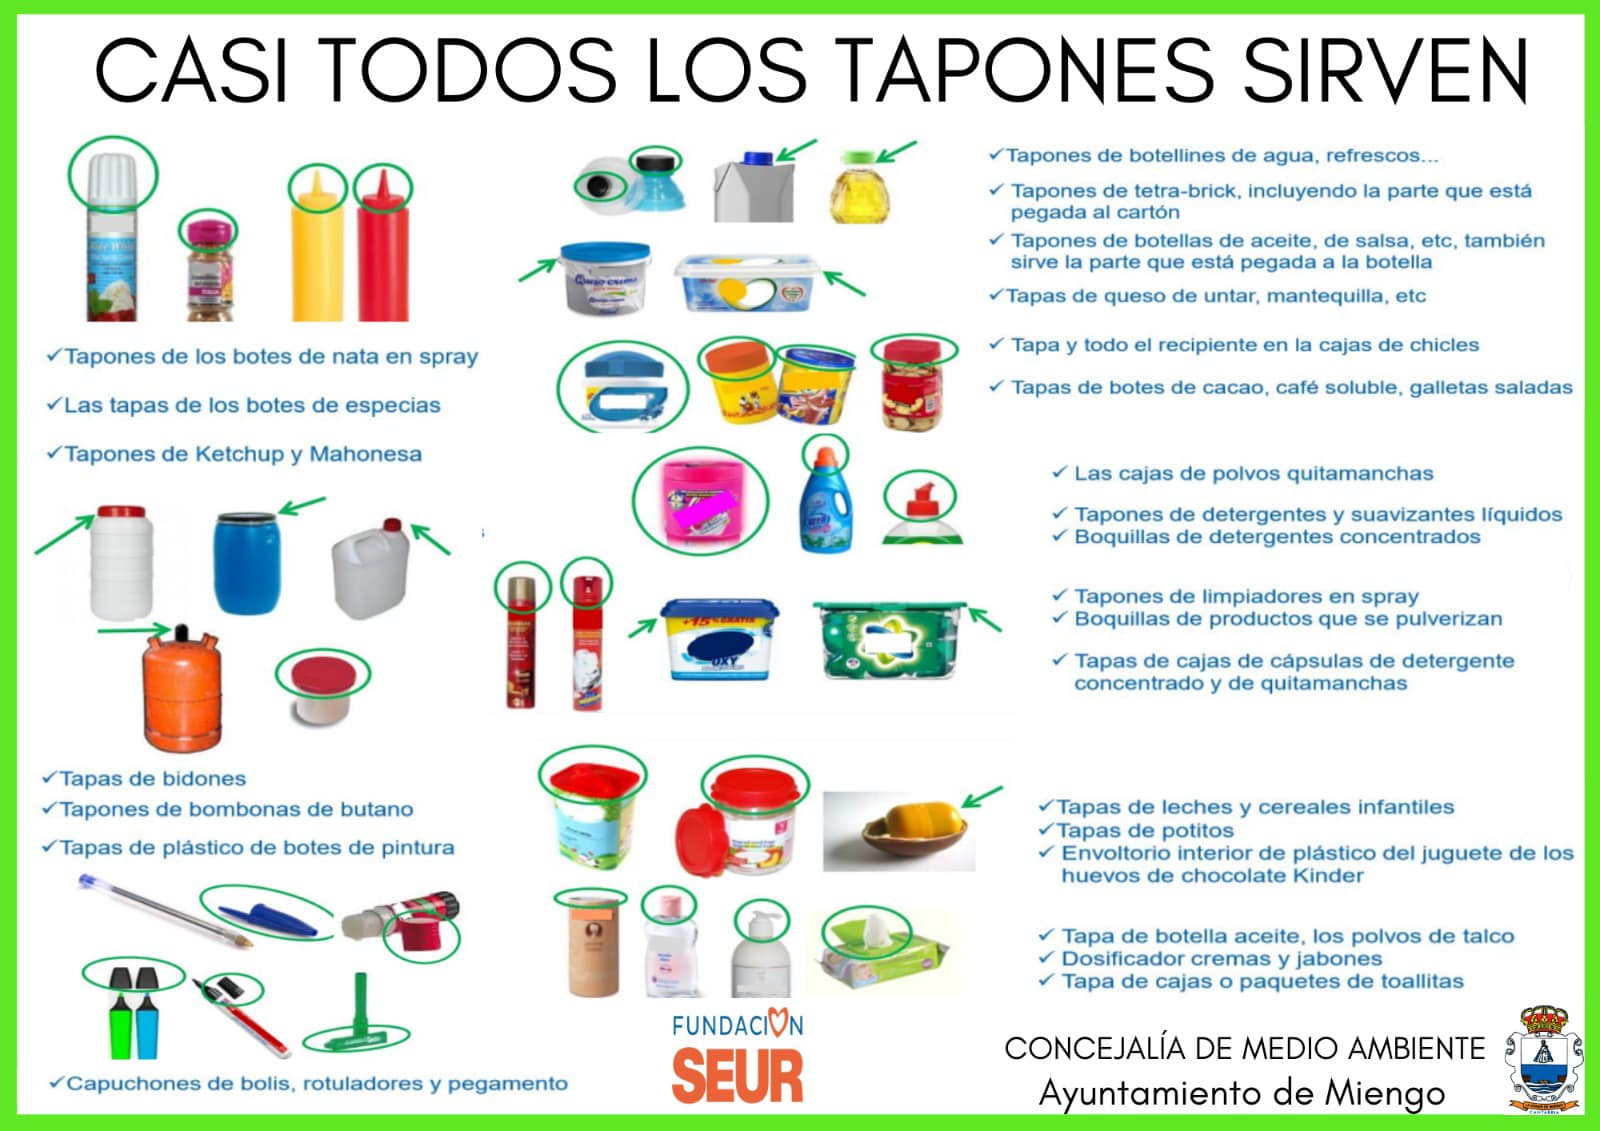 Tapones que sirven